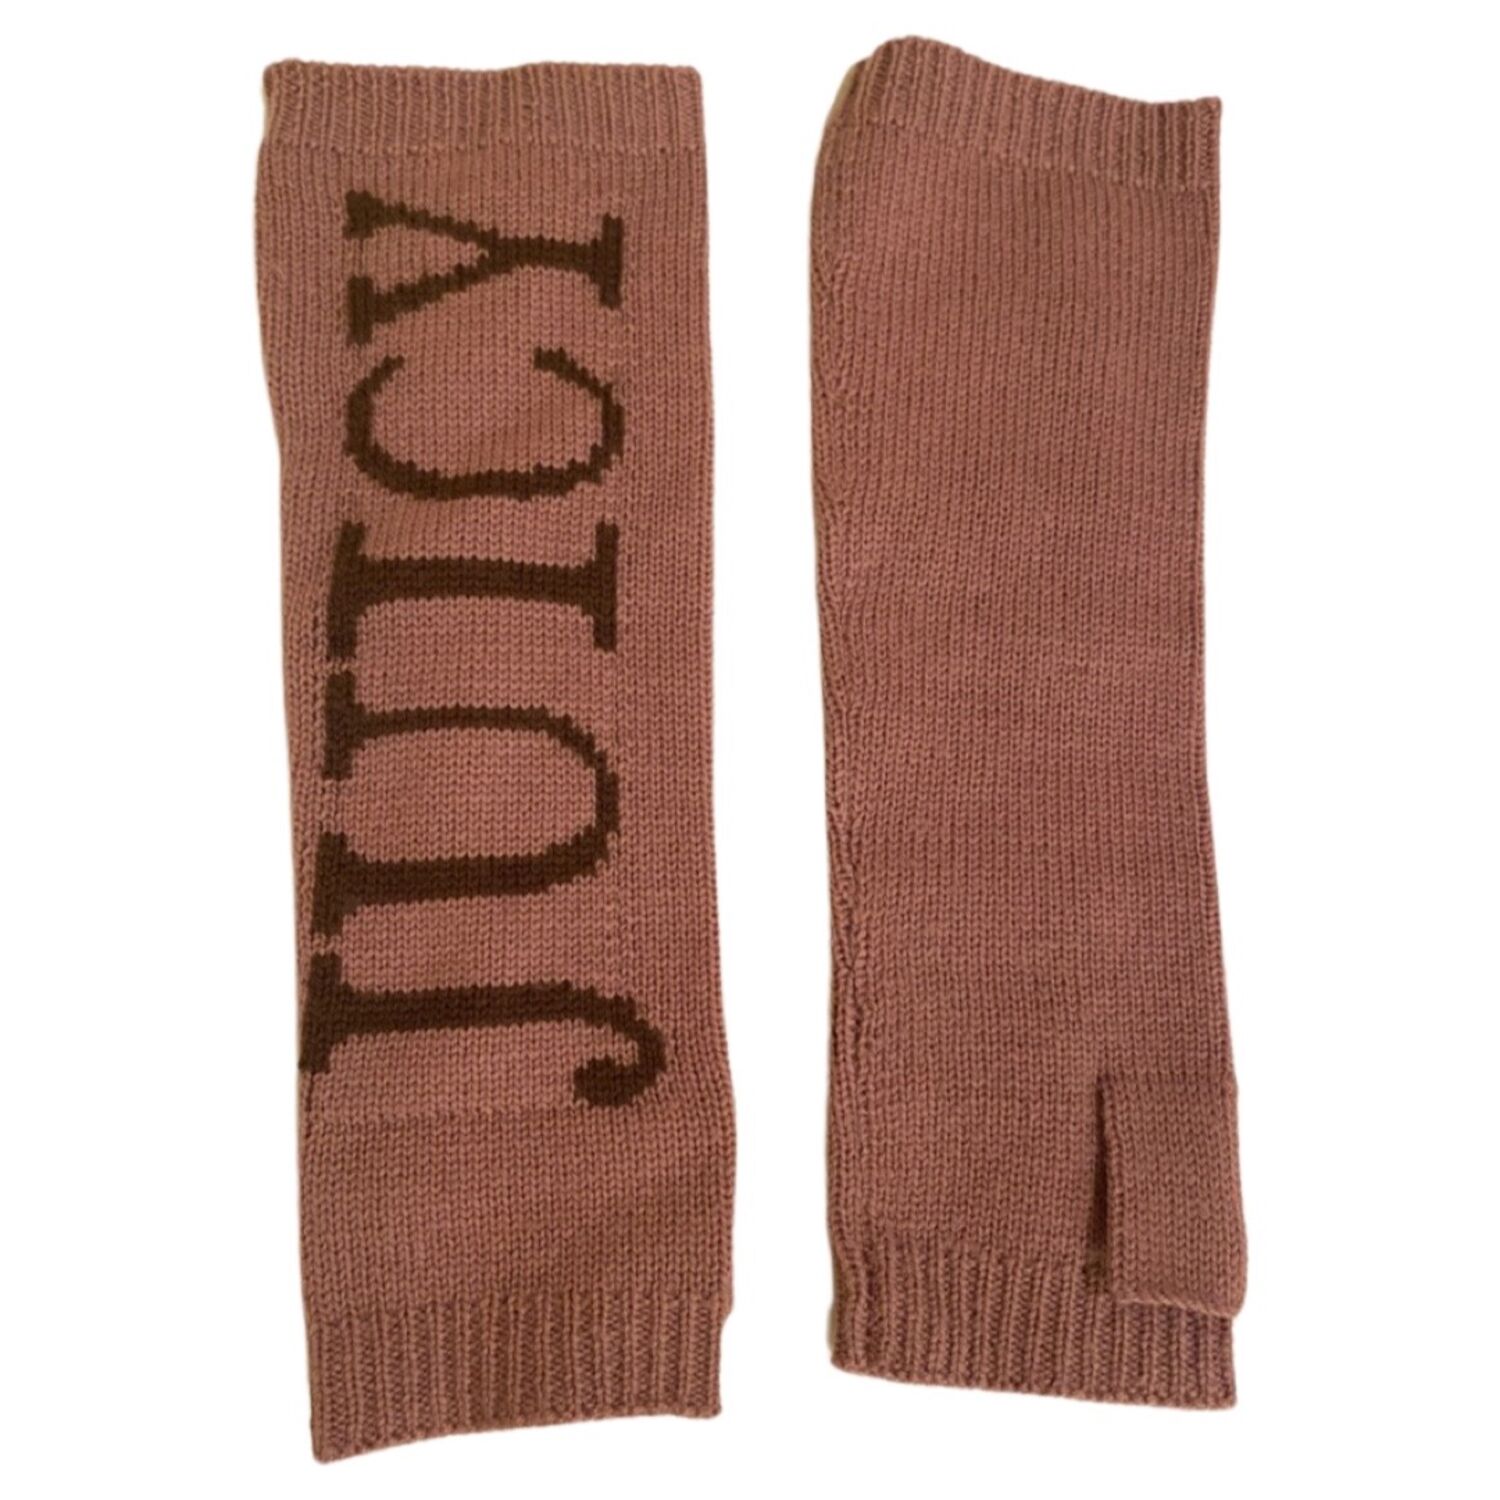 Wool Knitted Gloves